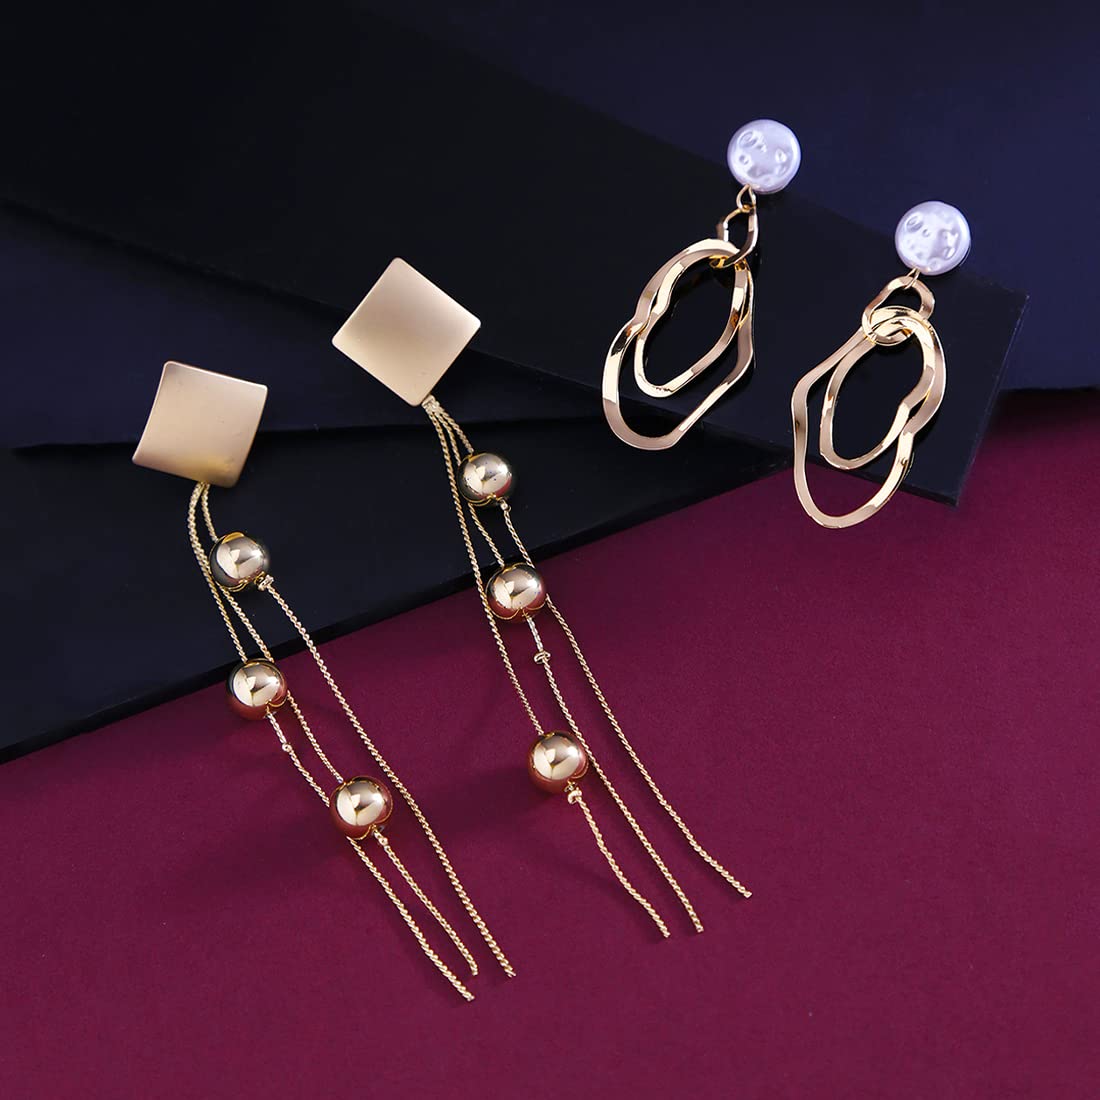 Yellow Chimes Latest Collection Silver Gold Plated Design Hoop Stud Earrings for Women and Girls (Dangler Design)